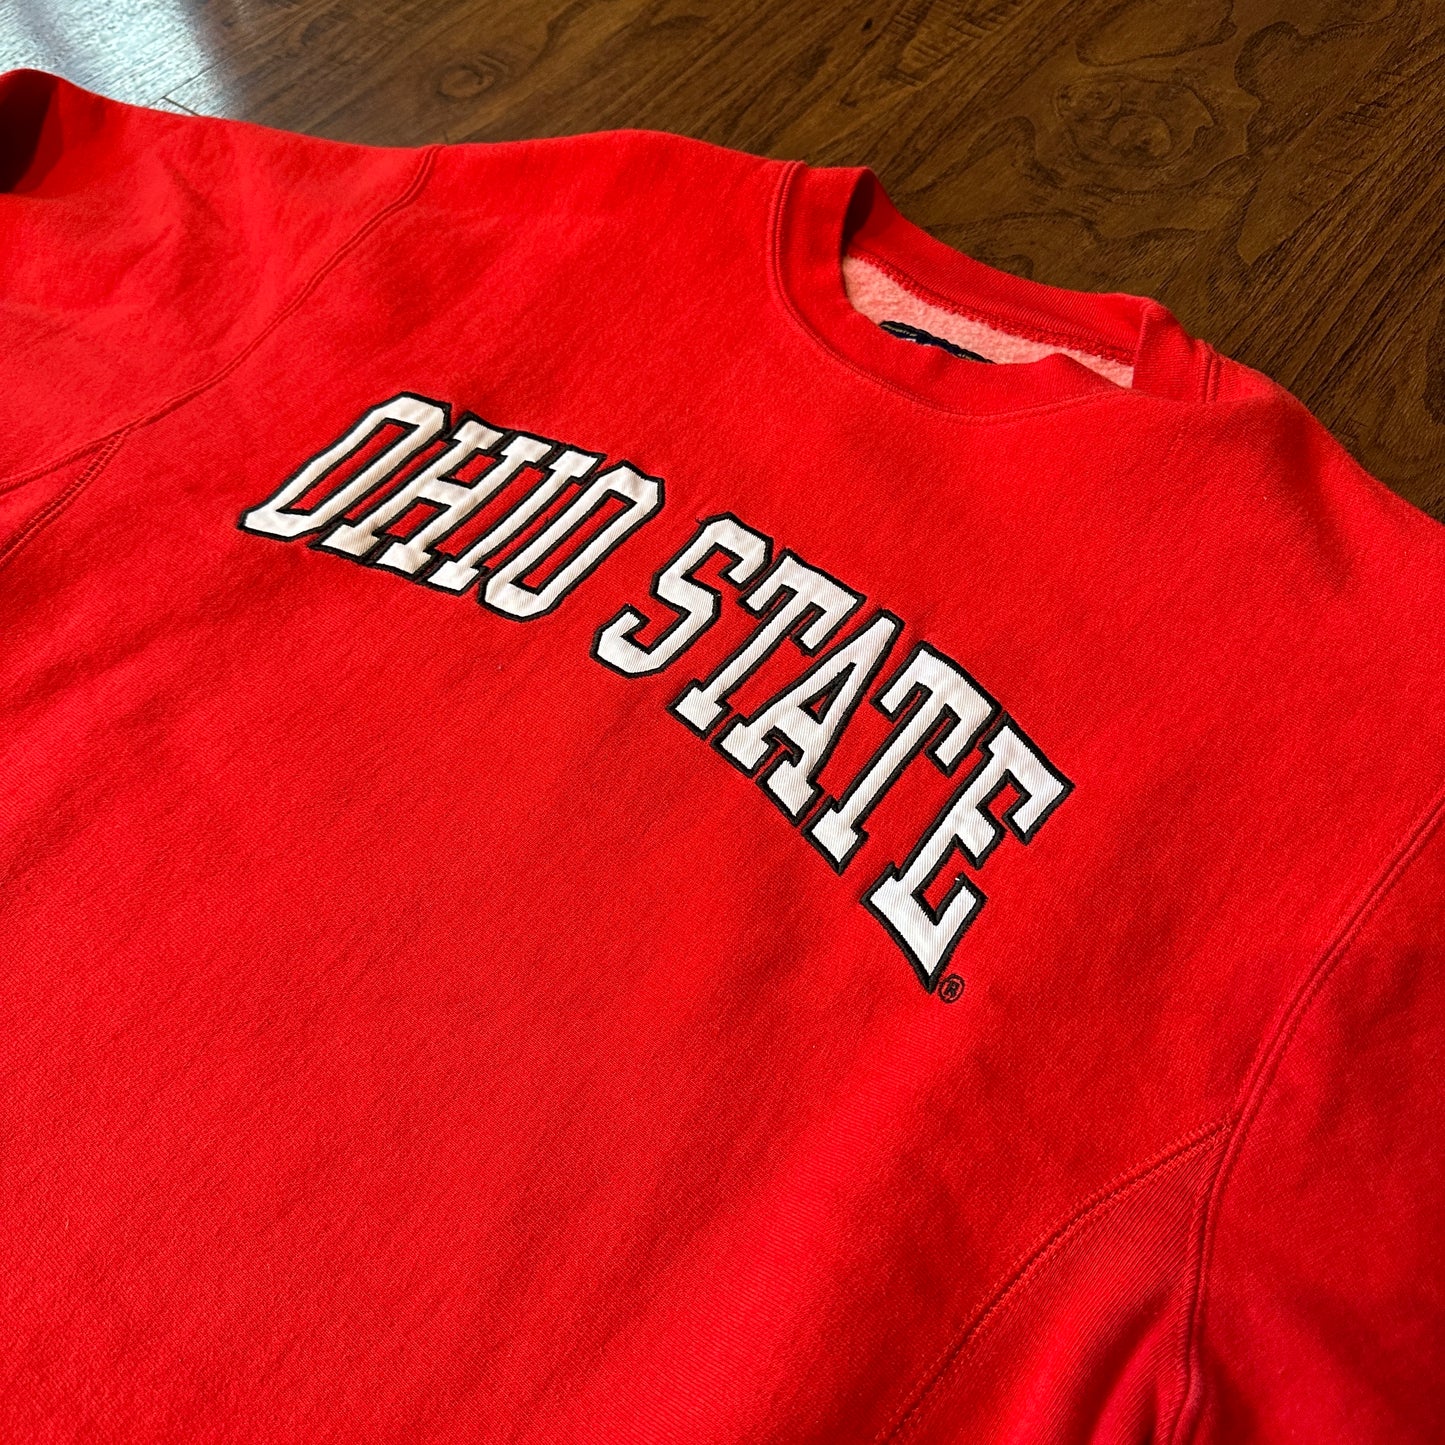 *VINTAGE* Ohio State Red Crewneck (FITS SMALL)